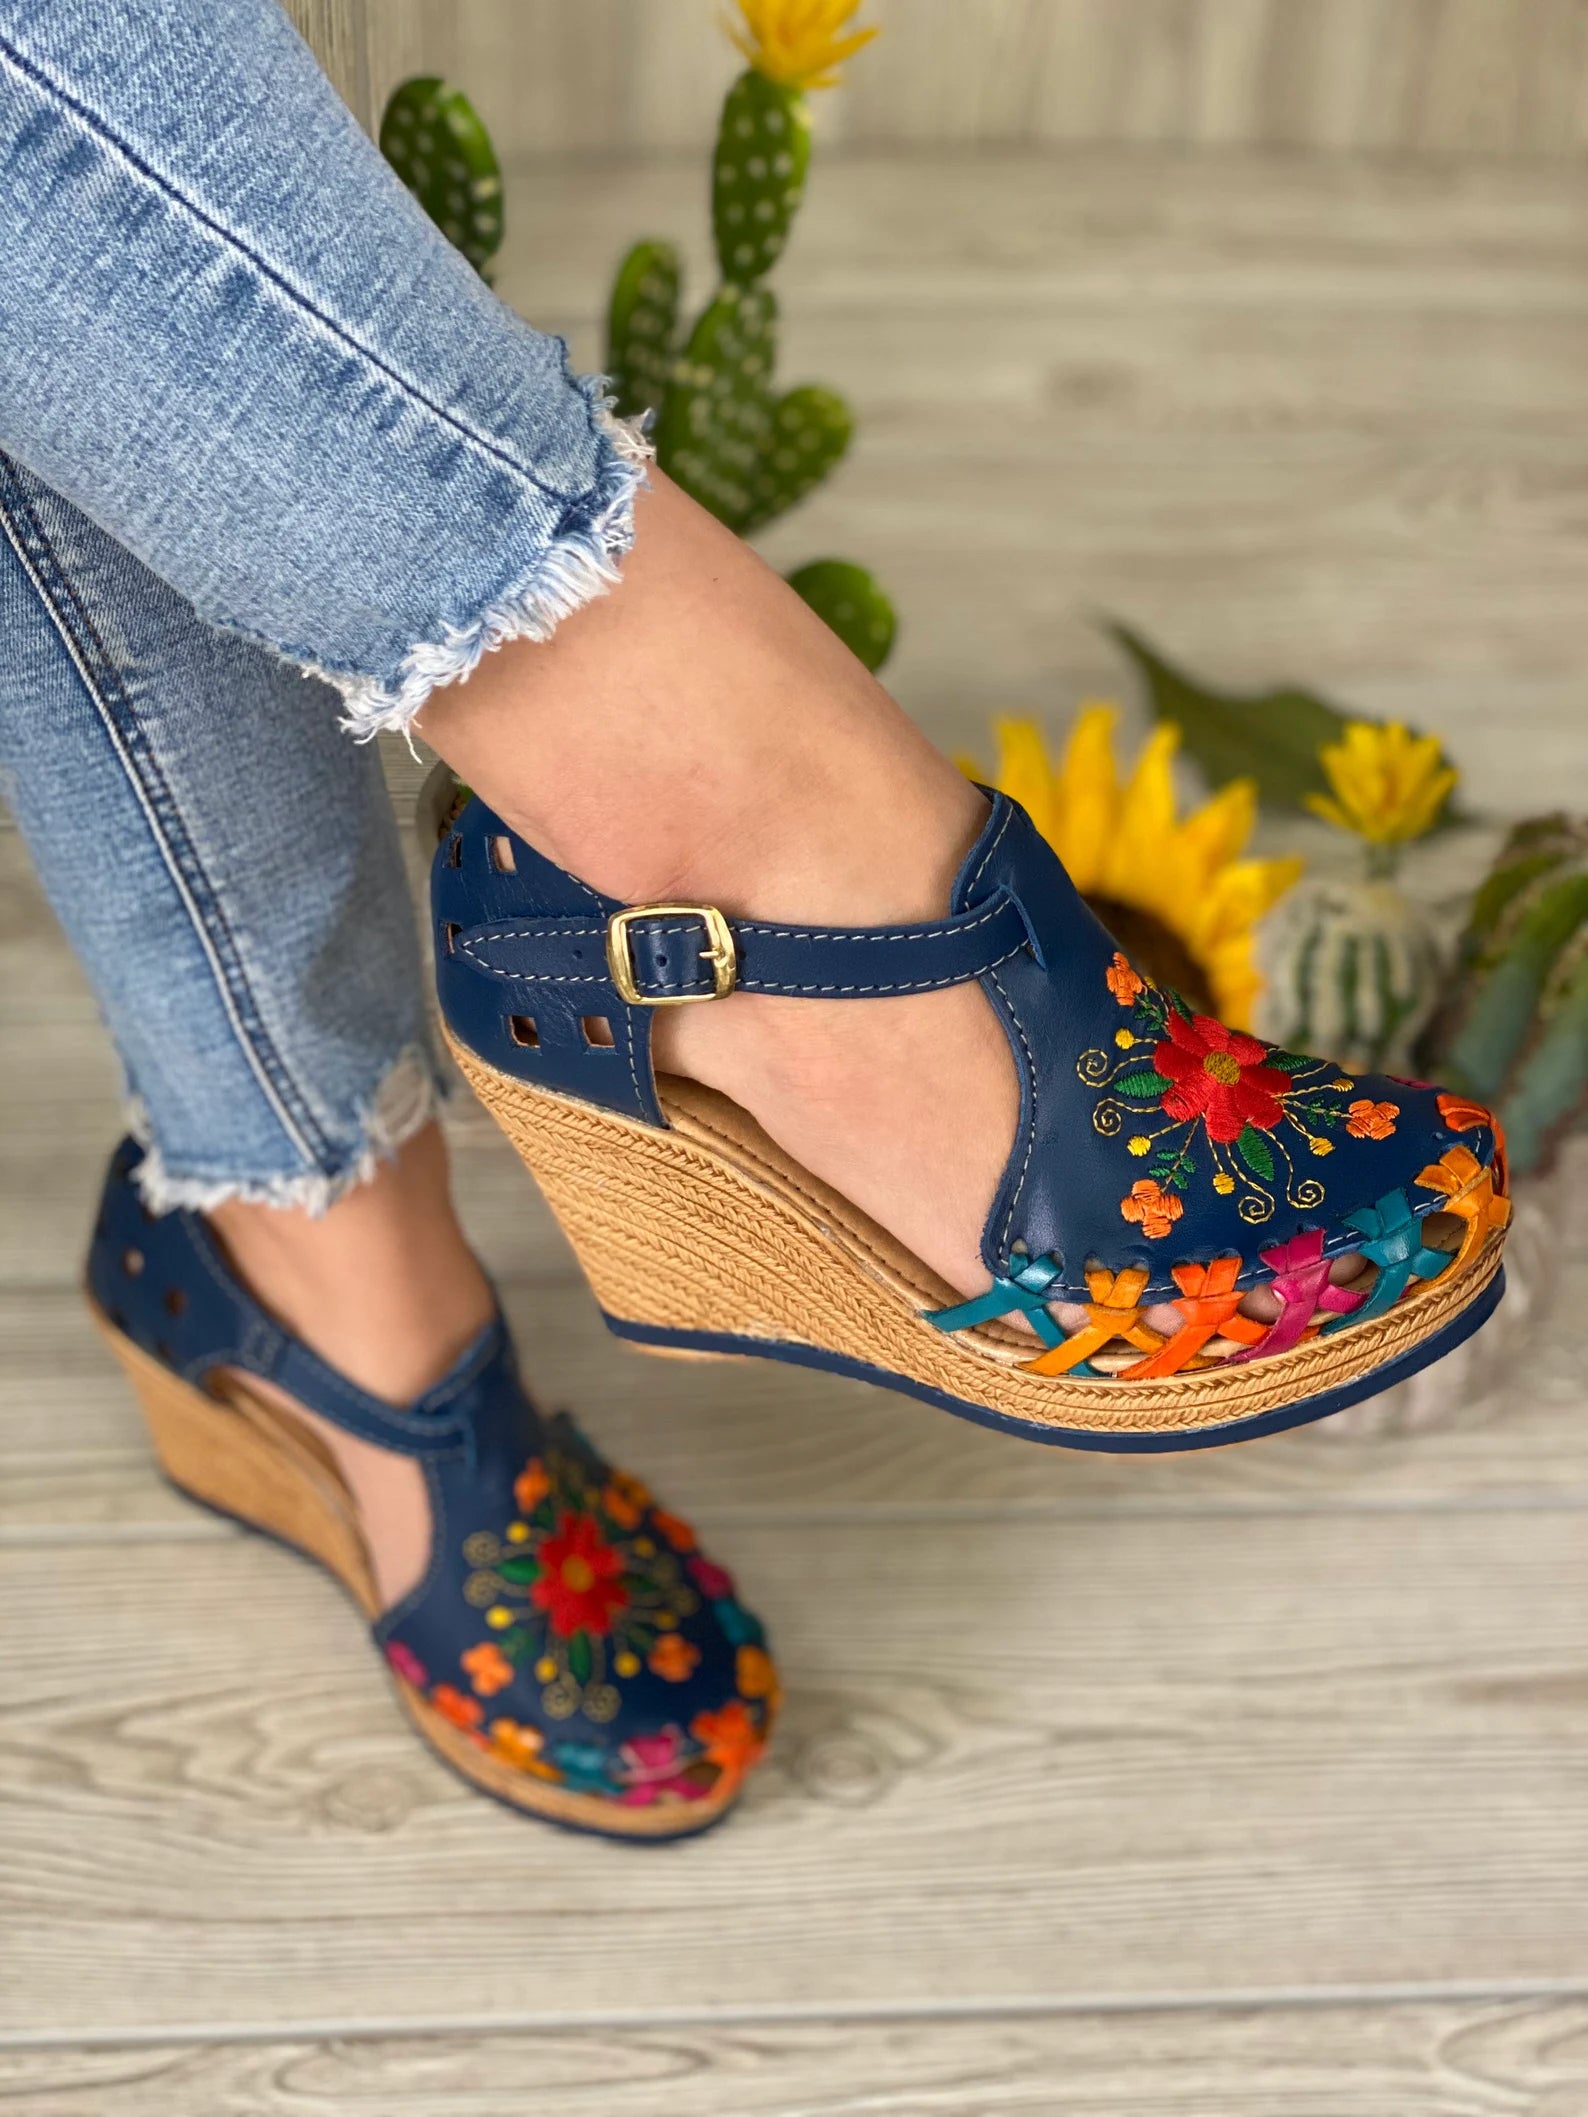 model wearing navy blue leather wedges with colorful embroidery and accents